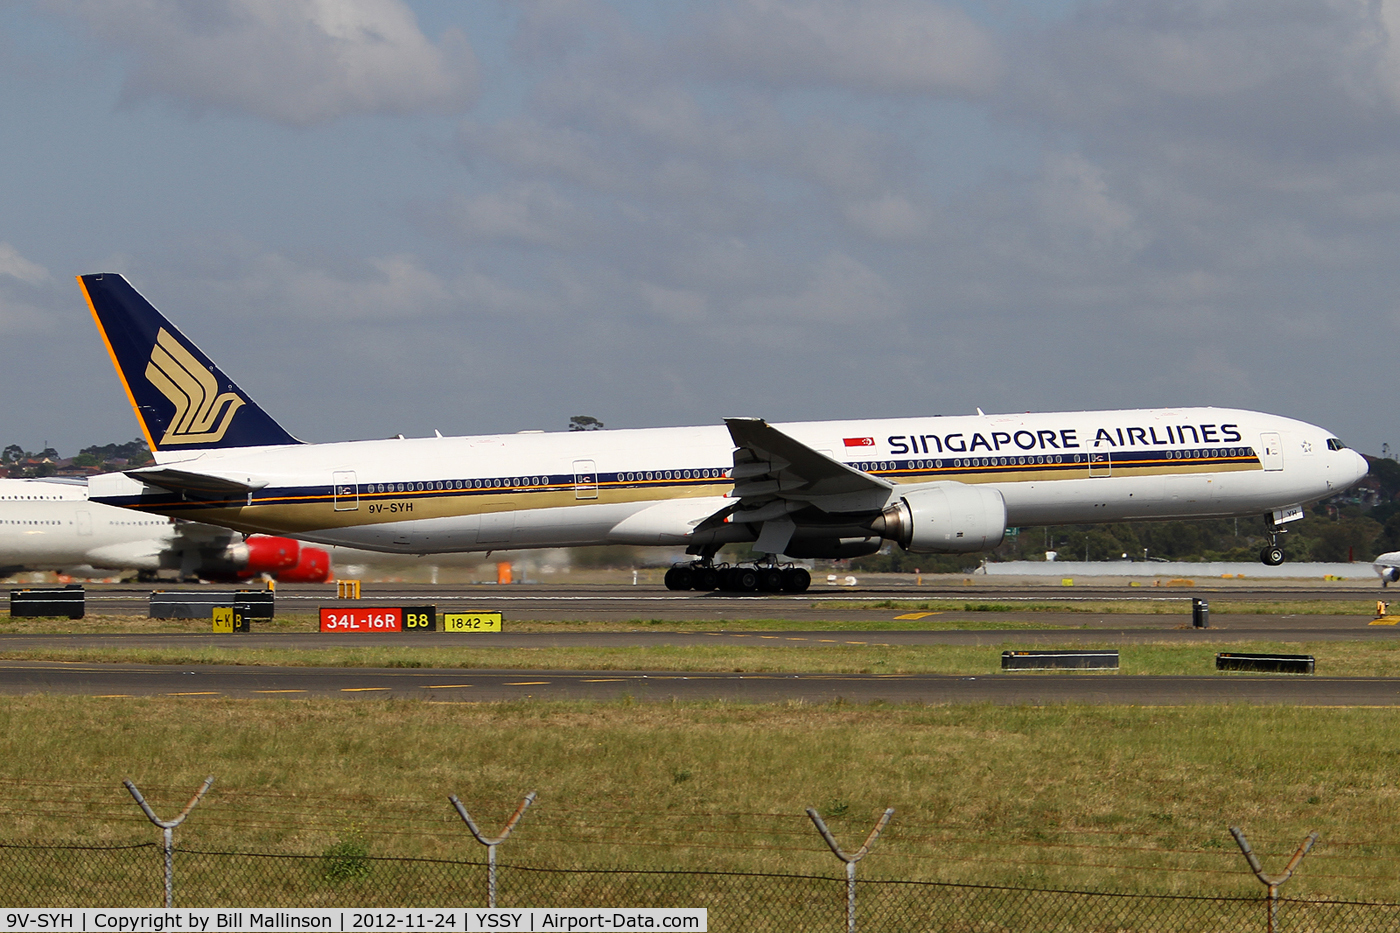 9V-SYH, 2002 Boeing 777-312 C/N 32317, rotating from 34L to SIN